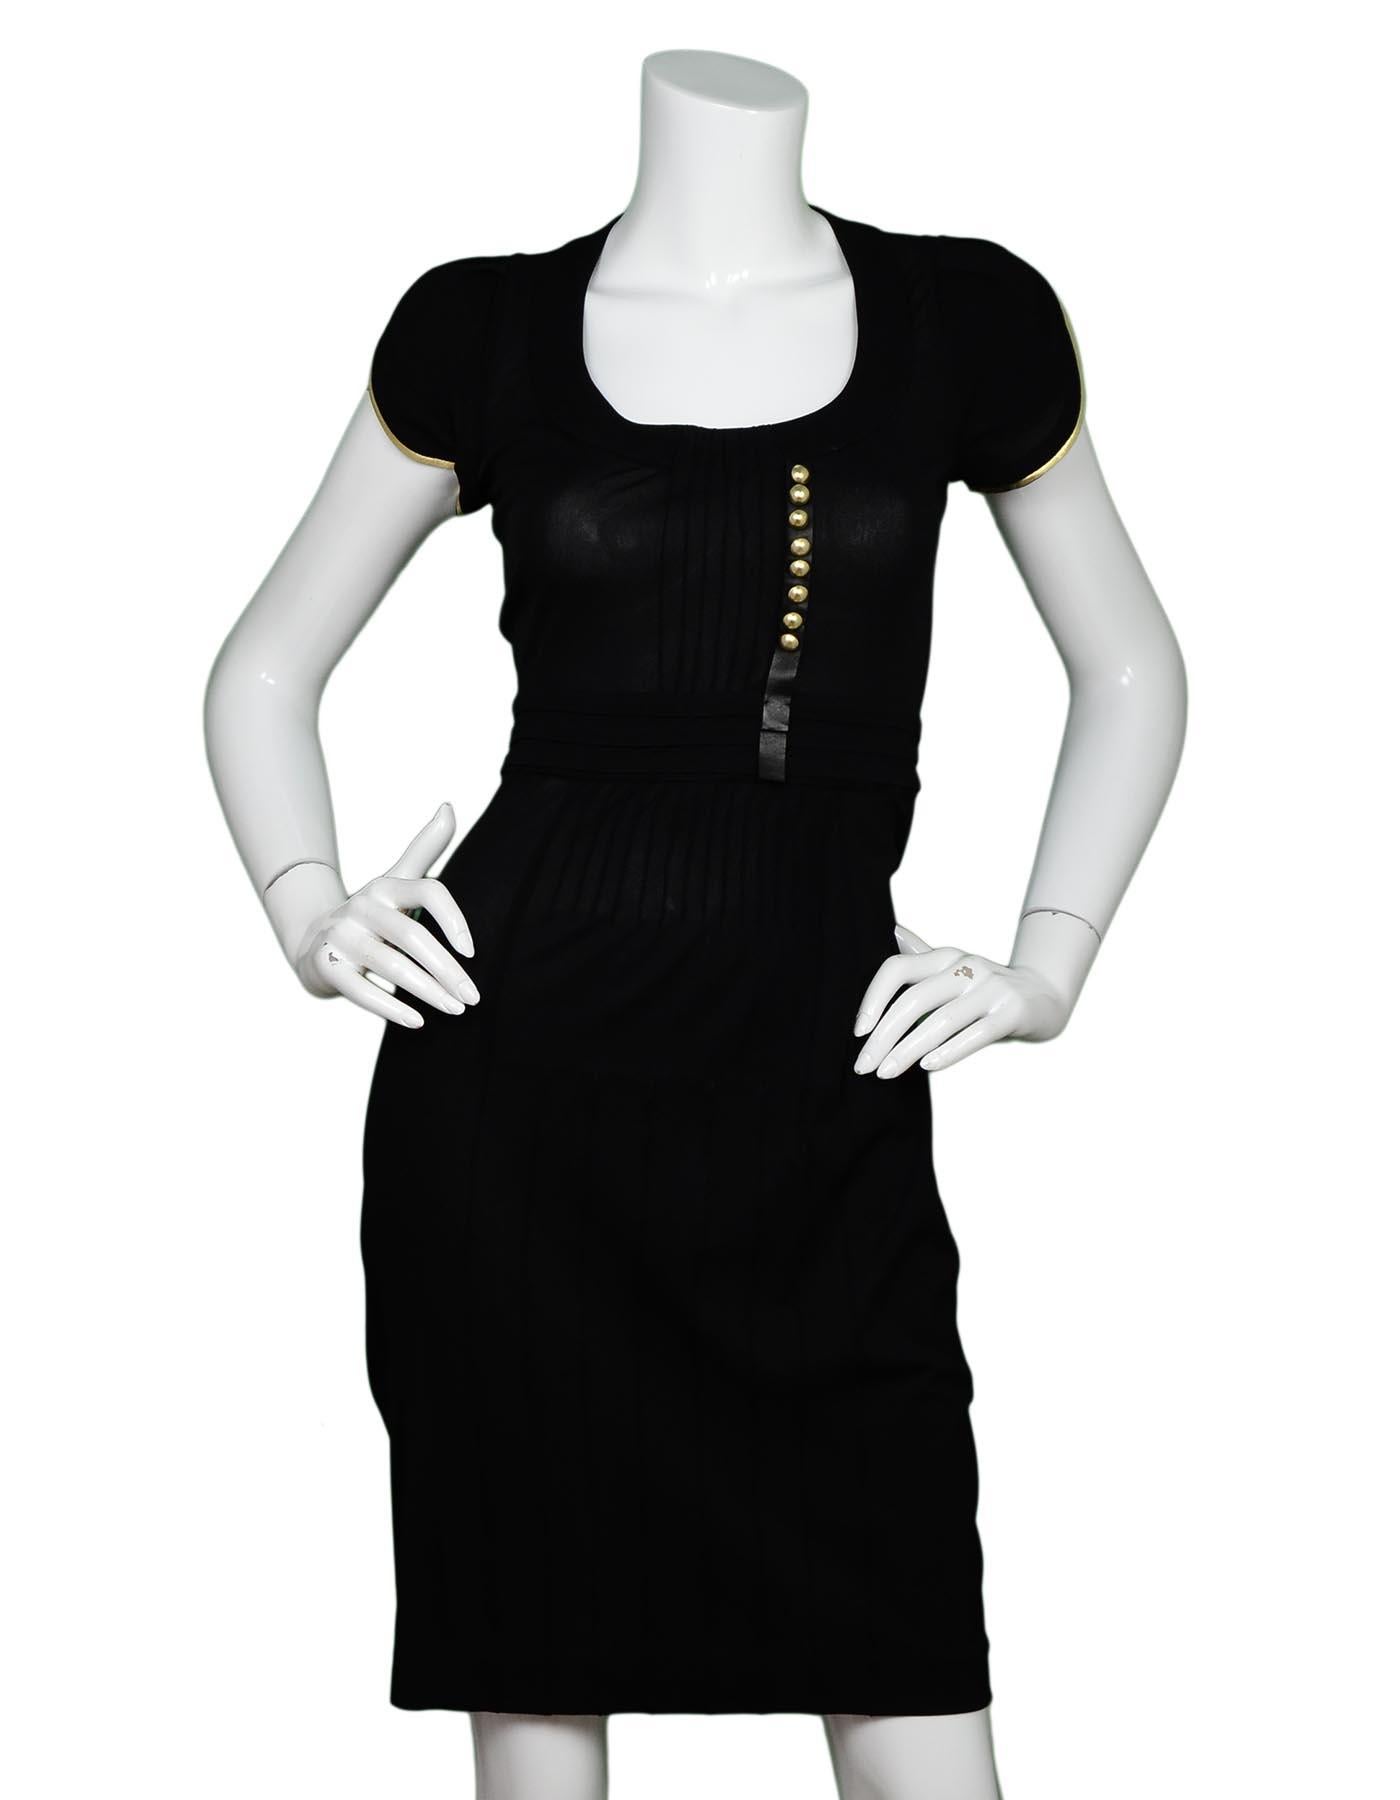 Prada Black Short Sleeve Dress W/ Pin Pleats & Gold Leather Trim Sz 38

Made In: Italy
Color: Black
Materials: 100% viscose
Opening/Closure: Hidden back zipper with hook eye at top
Overall Condition: Excellent pre-owned condition 

Measurements: